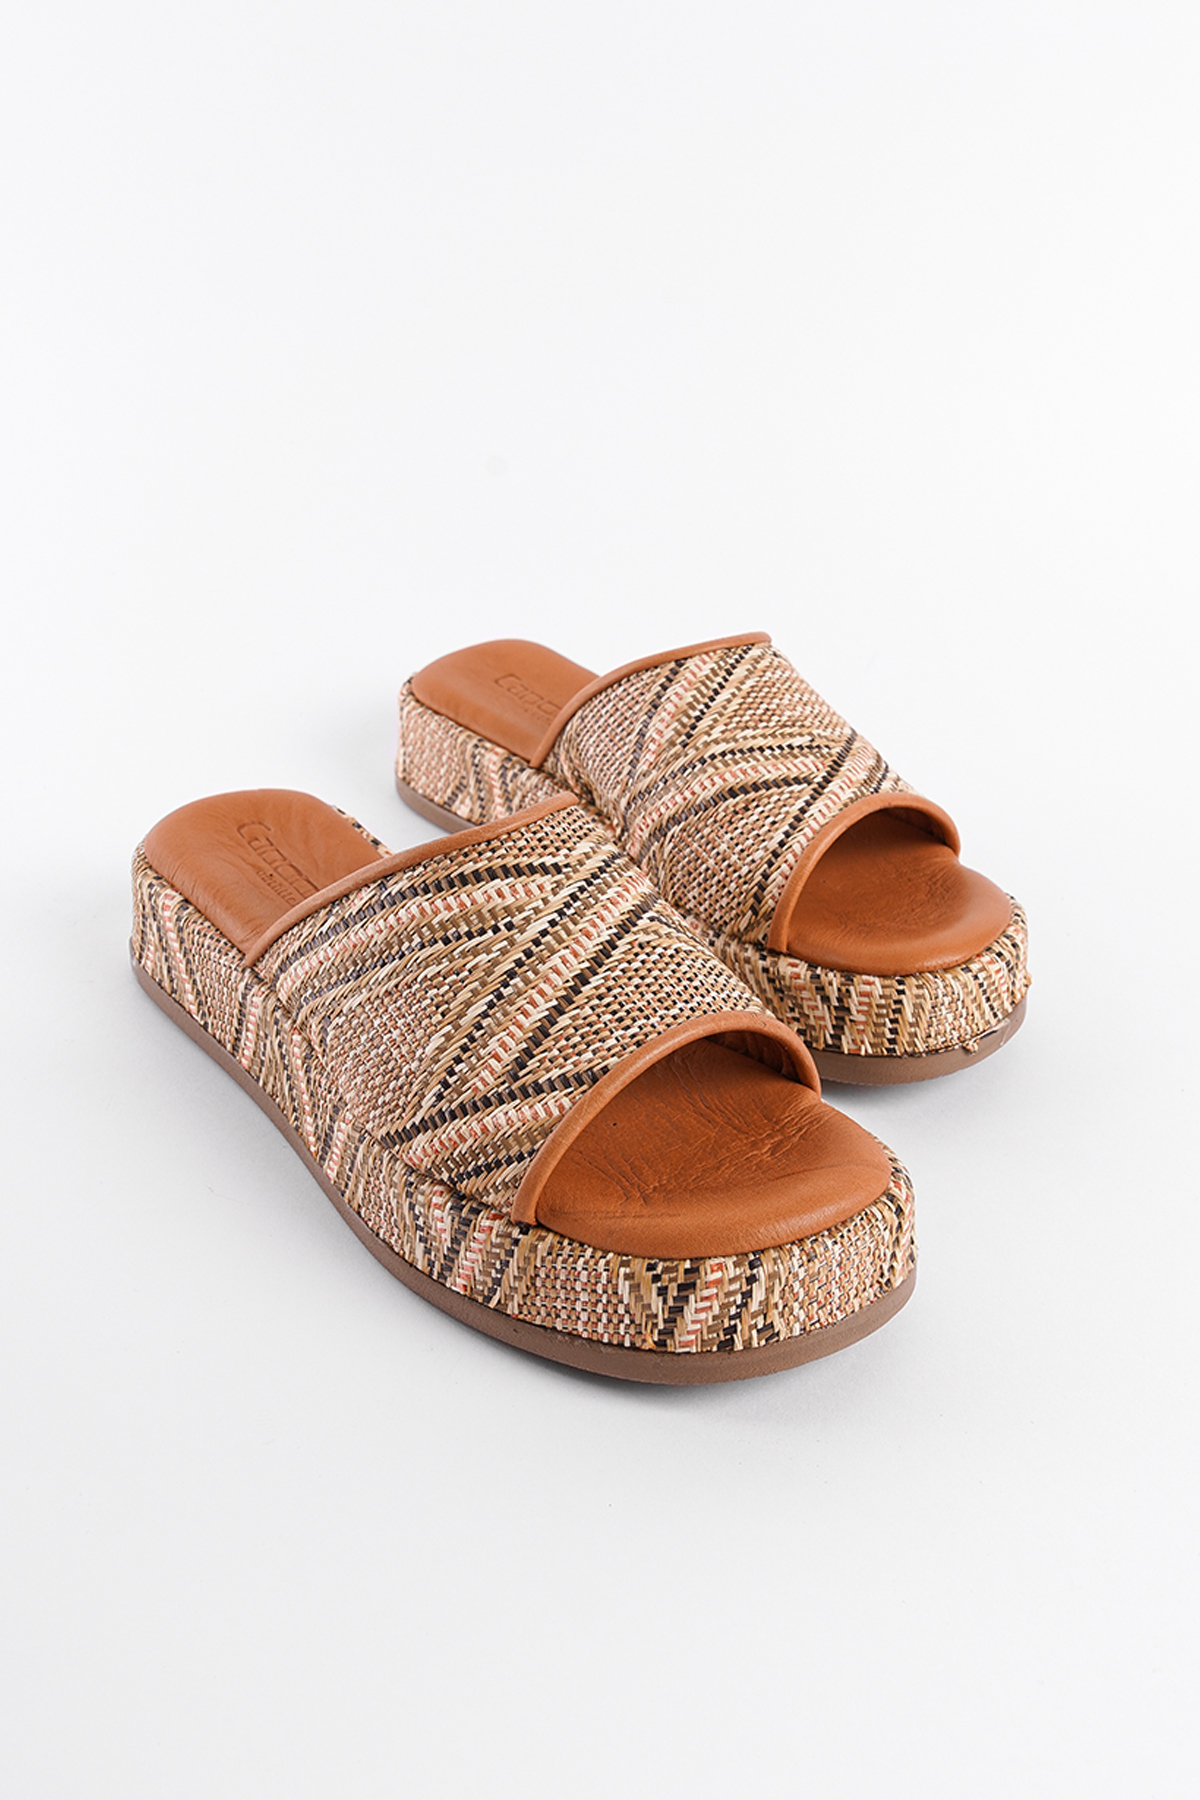 Capone Outfitters Straw Genuine Leather Single Strip Women's Slippers